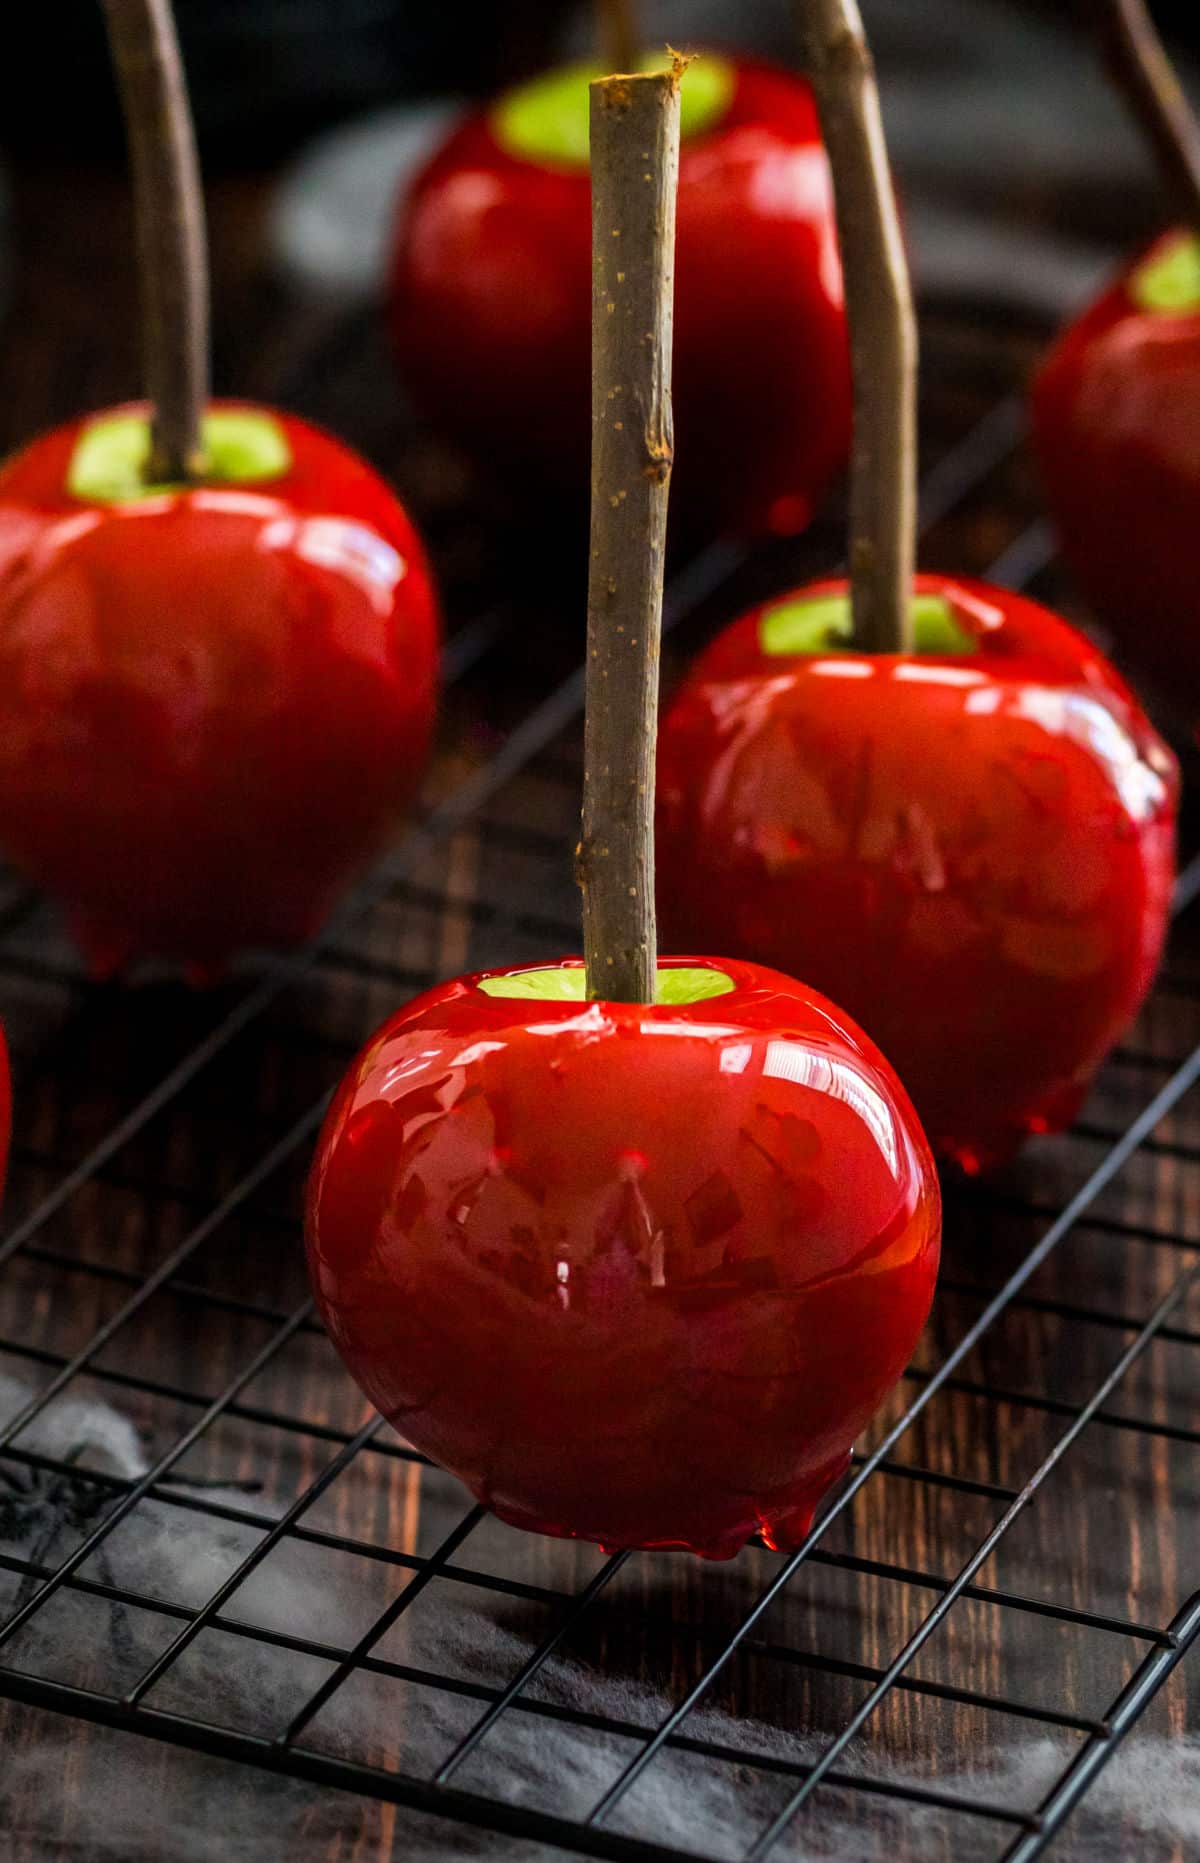 Four candy apples with stick stems. 